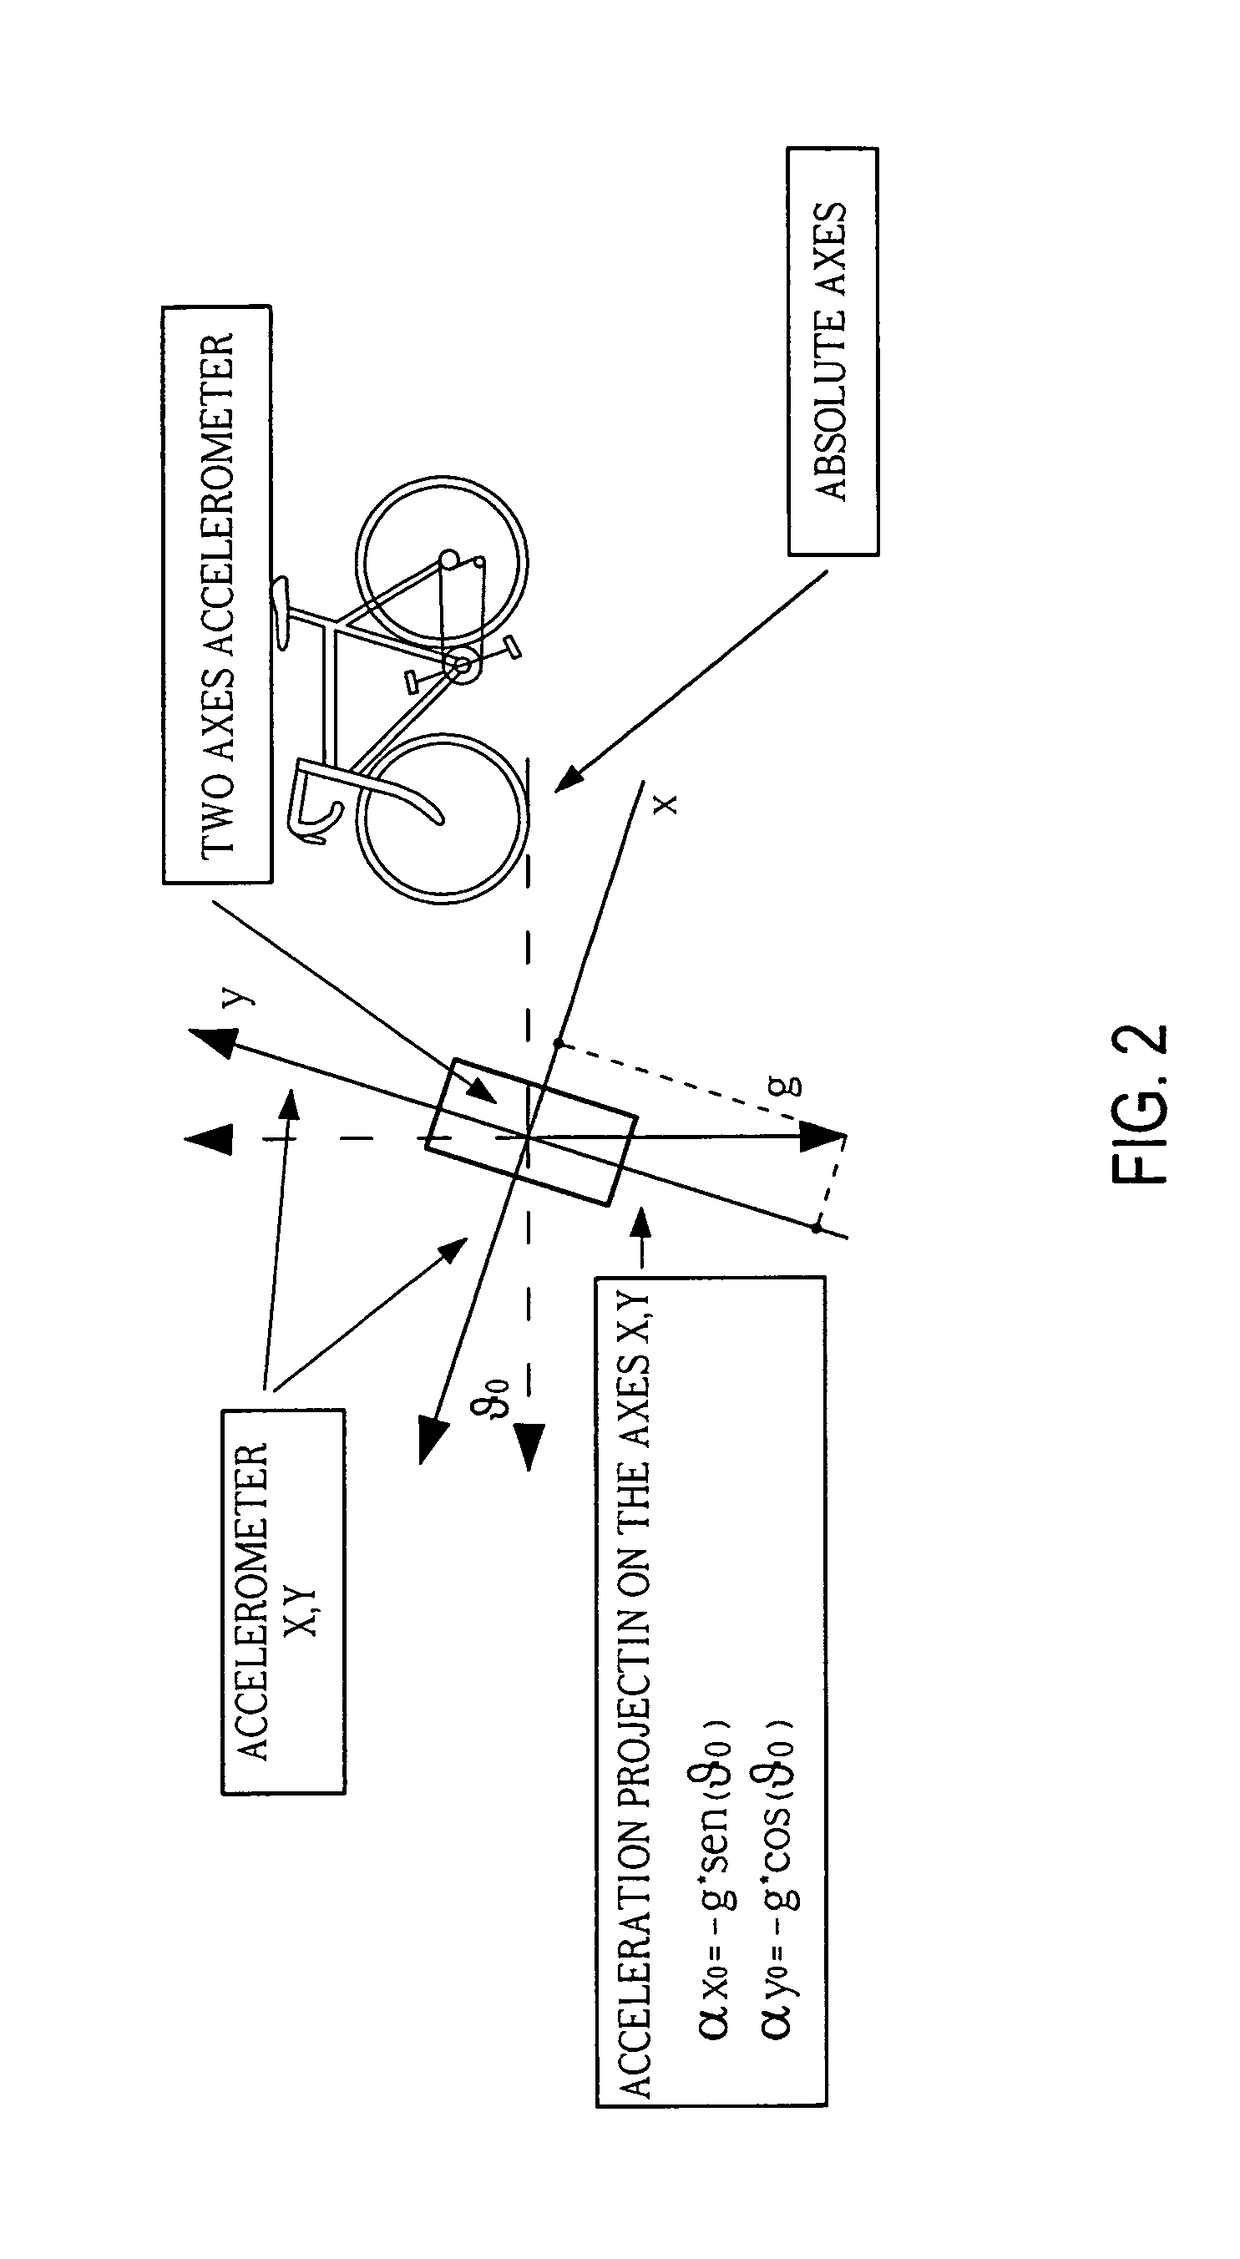 Multifunctional rear view mirror mounted device for bicycles which provides display information